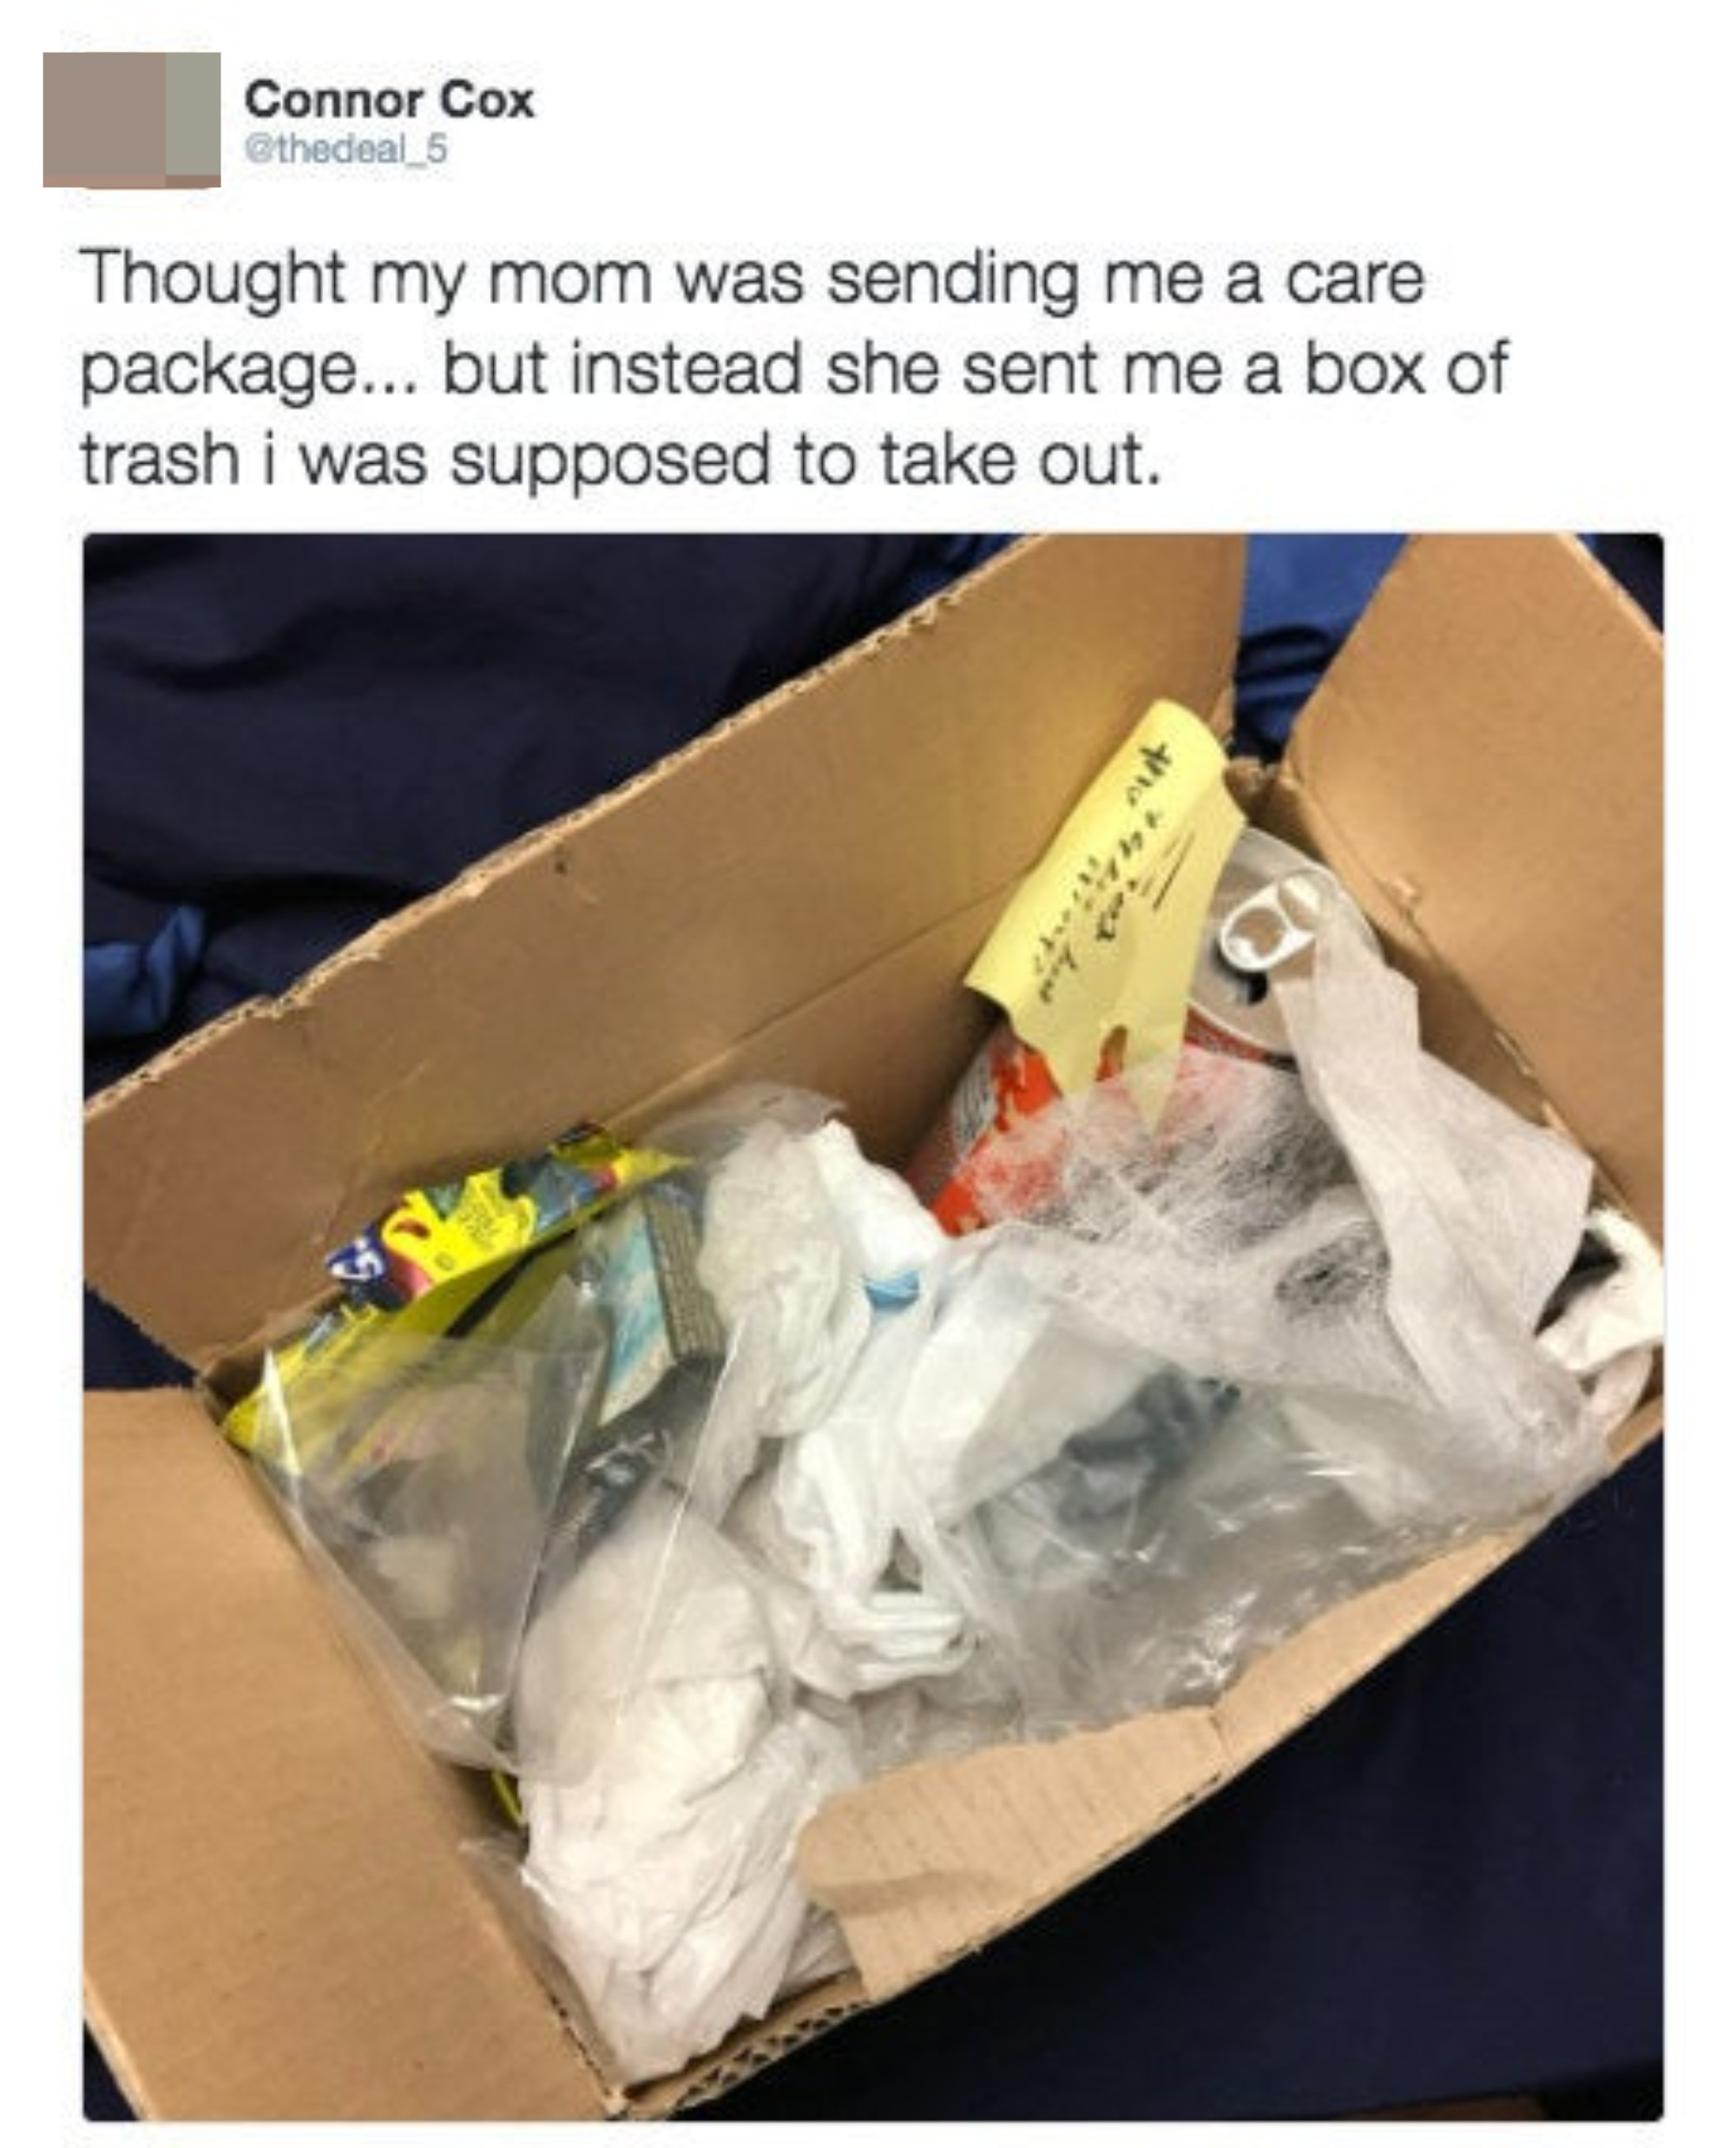 A mom sends trash to a kid who did not take it out